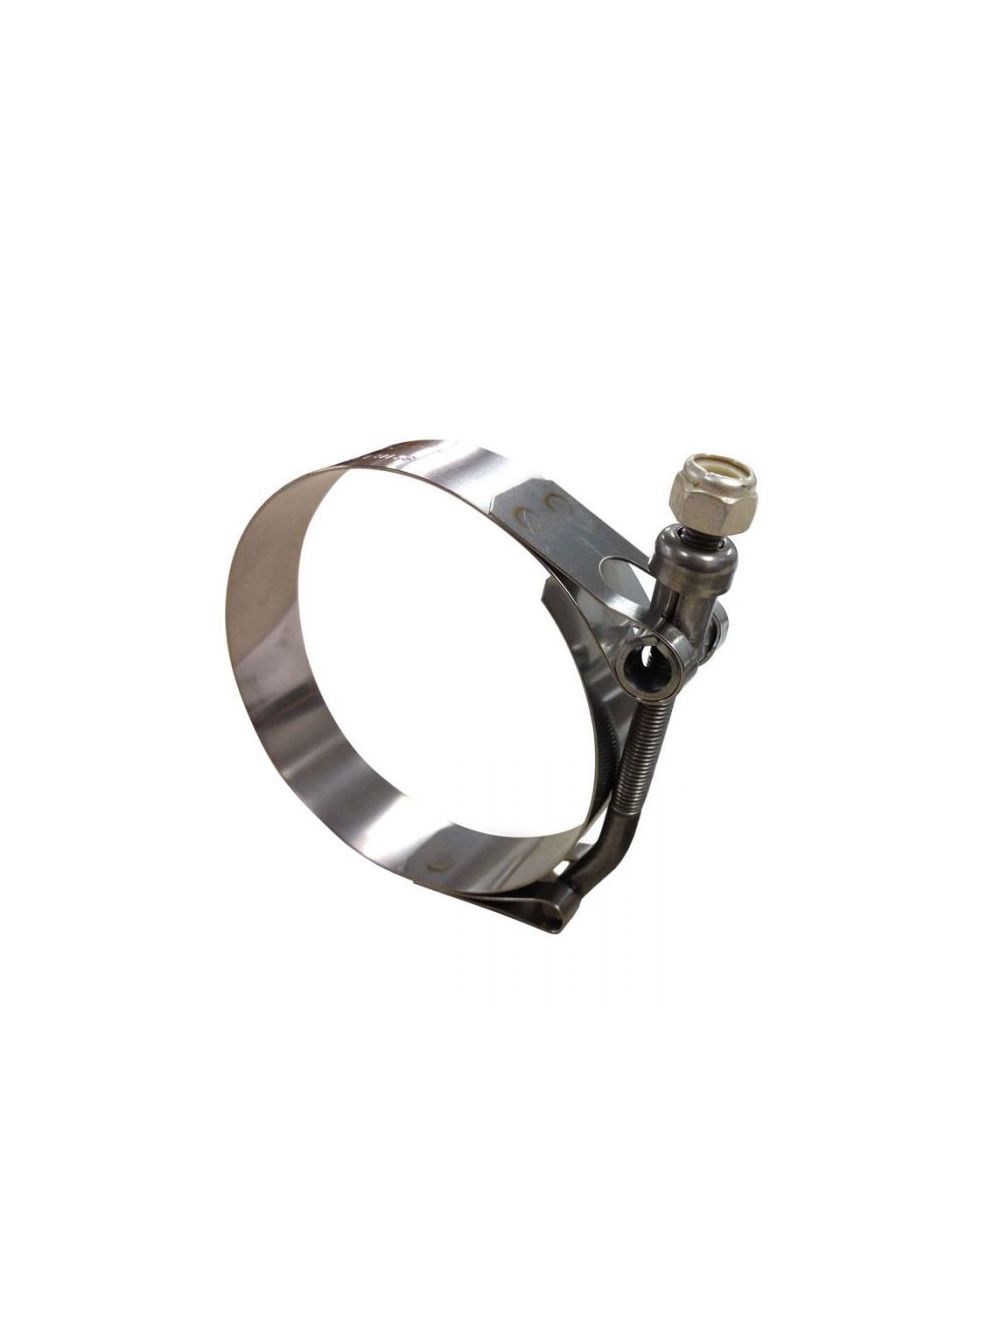 EXHAUST T-BOLT CLAMP 3.5"